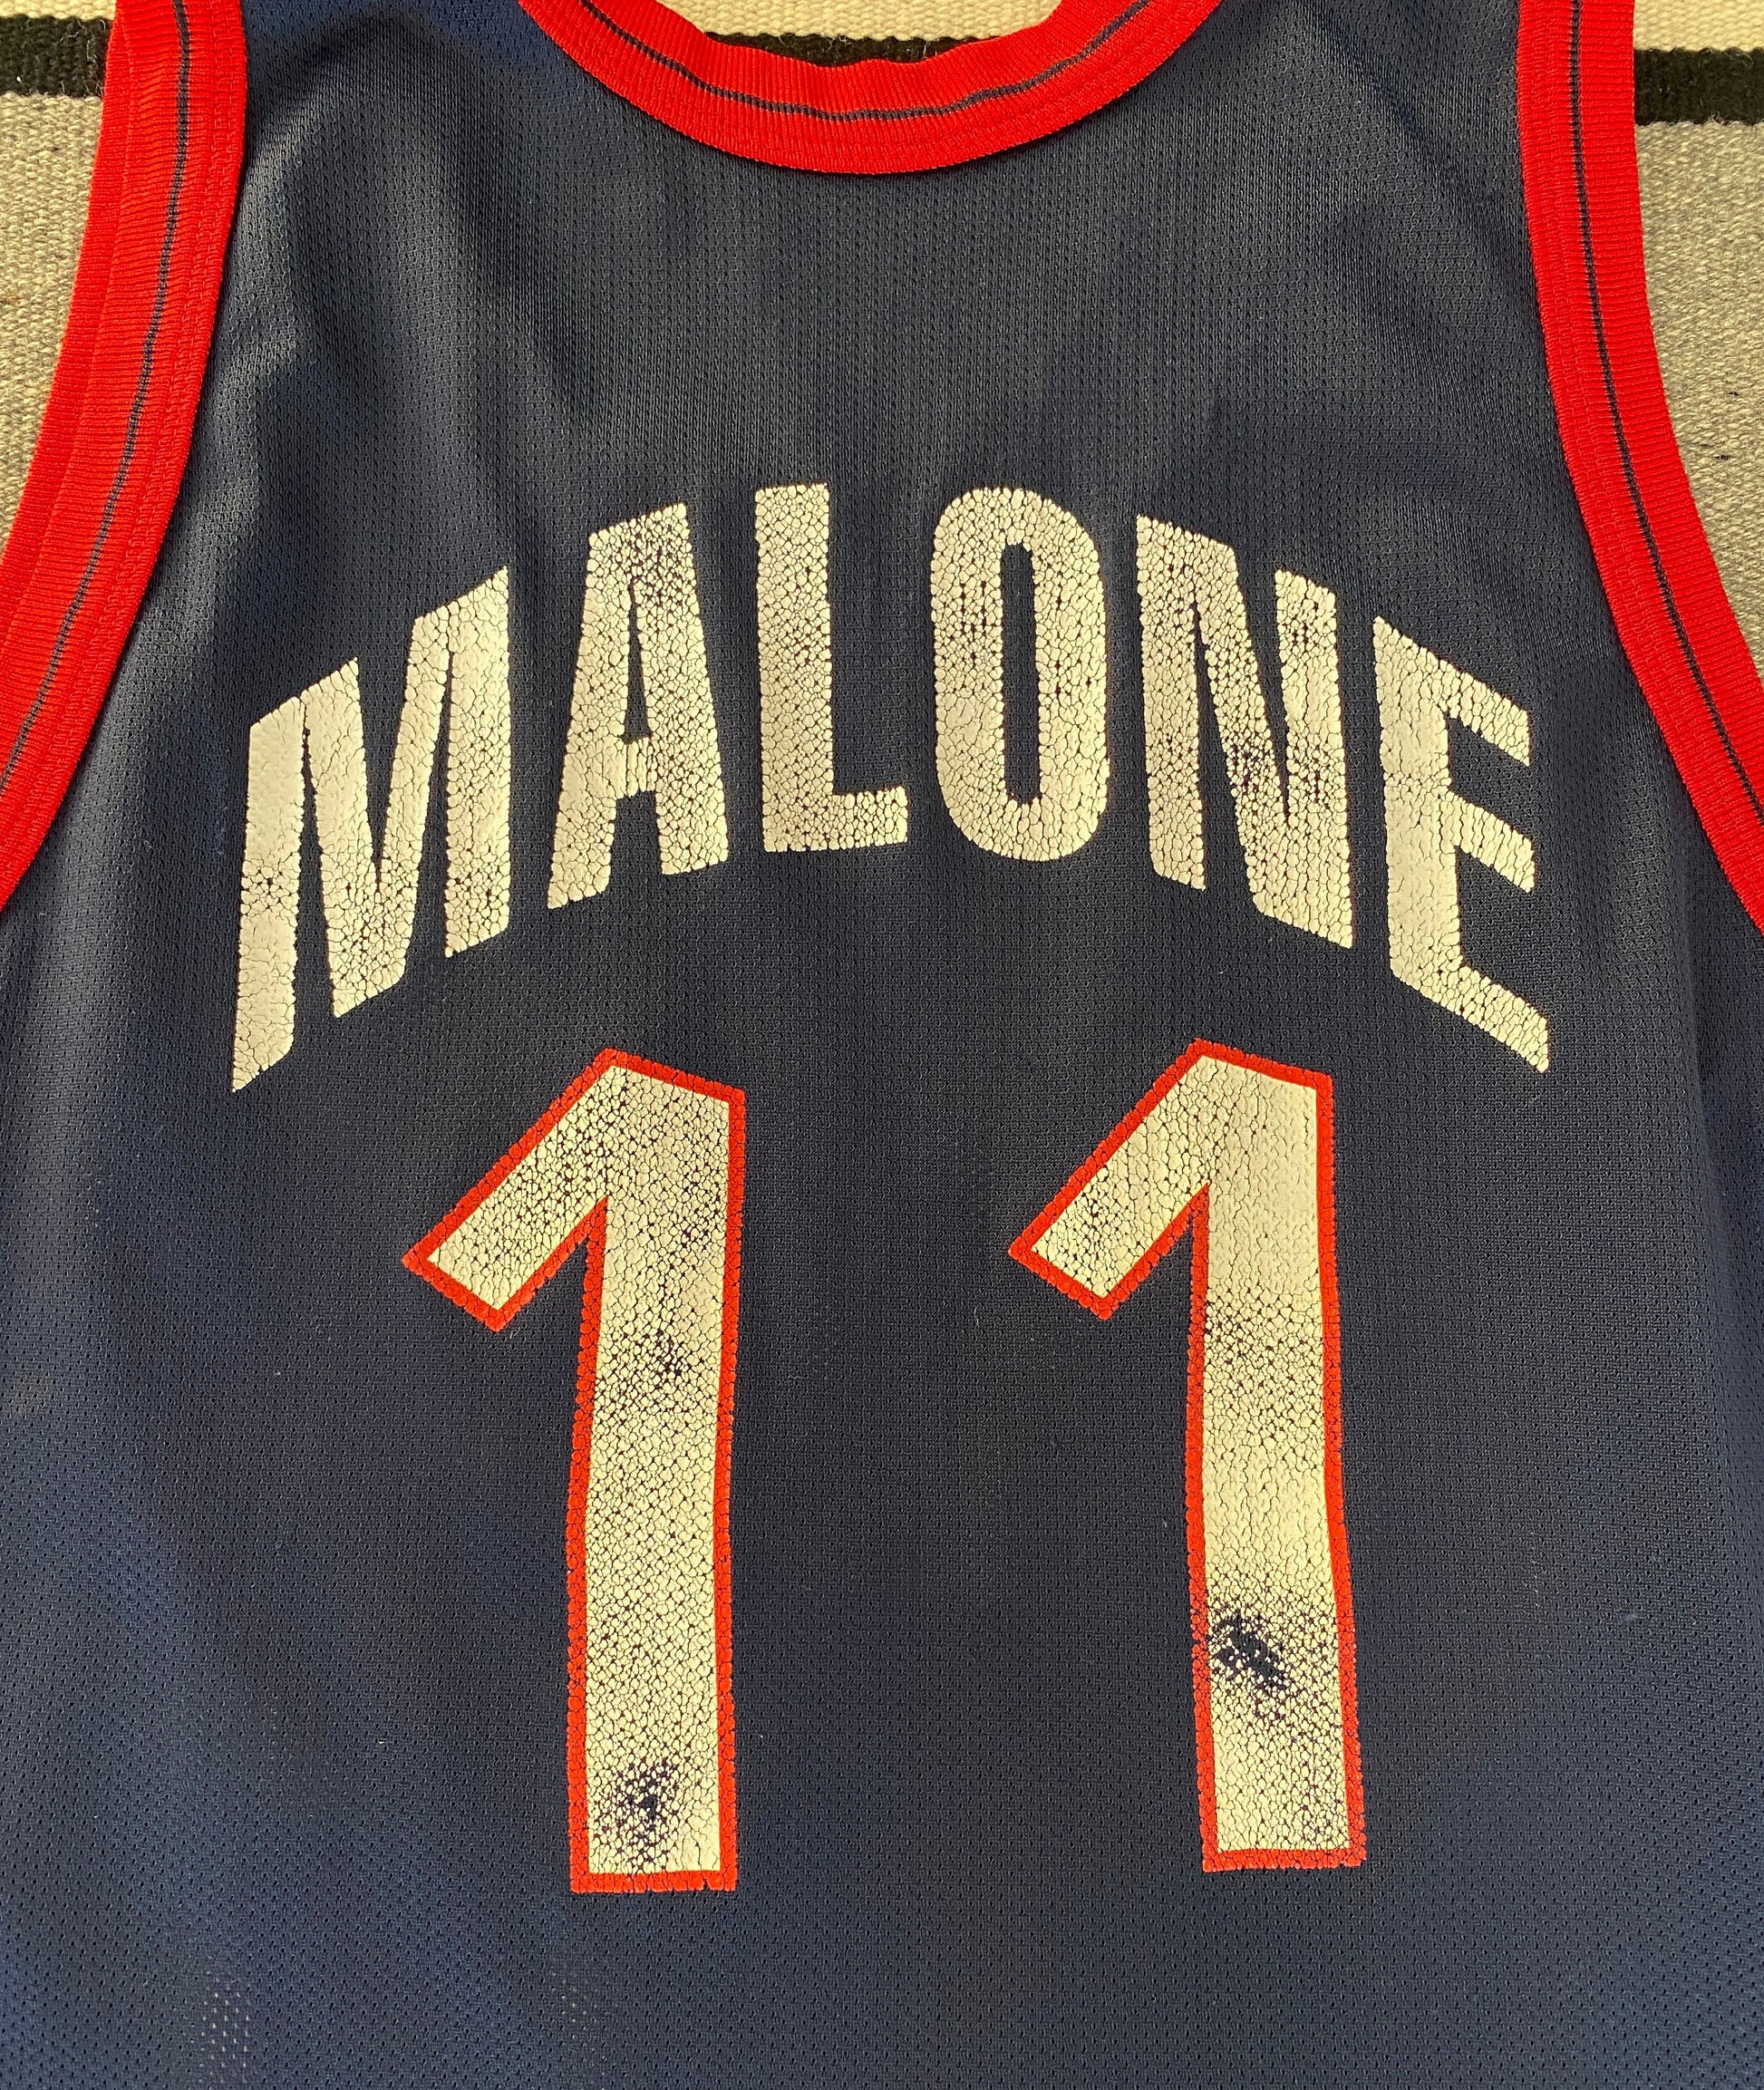 Size 48 Carl Malone #11 Vintage Dream Team Olympic Champion NBA Jersey - Made in USA - back View